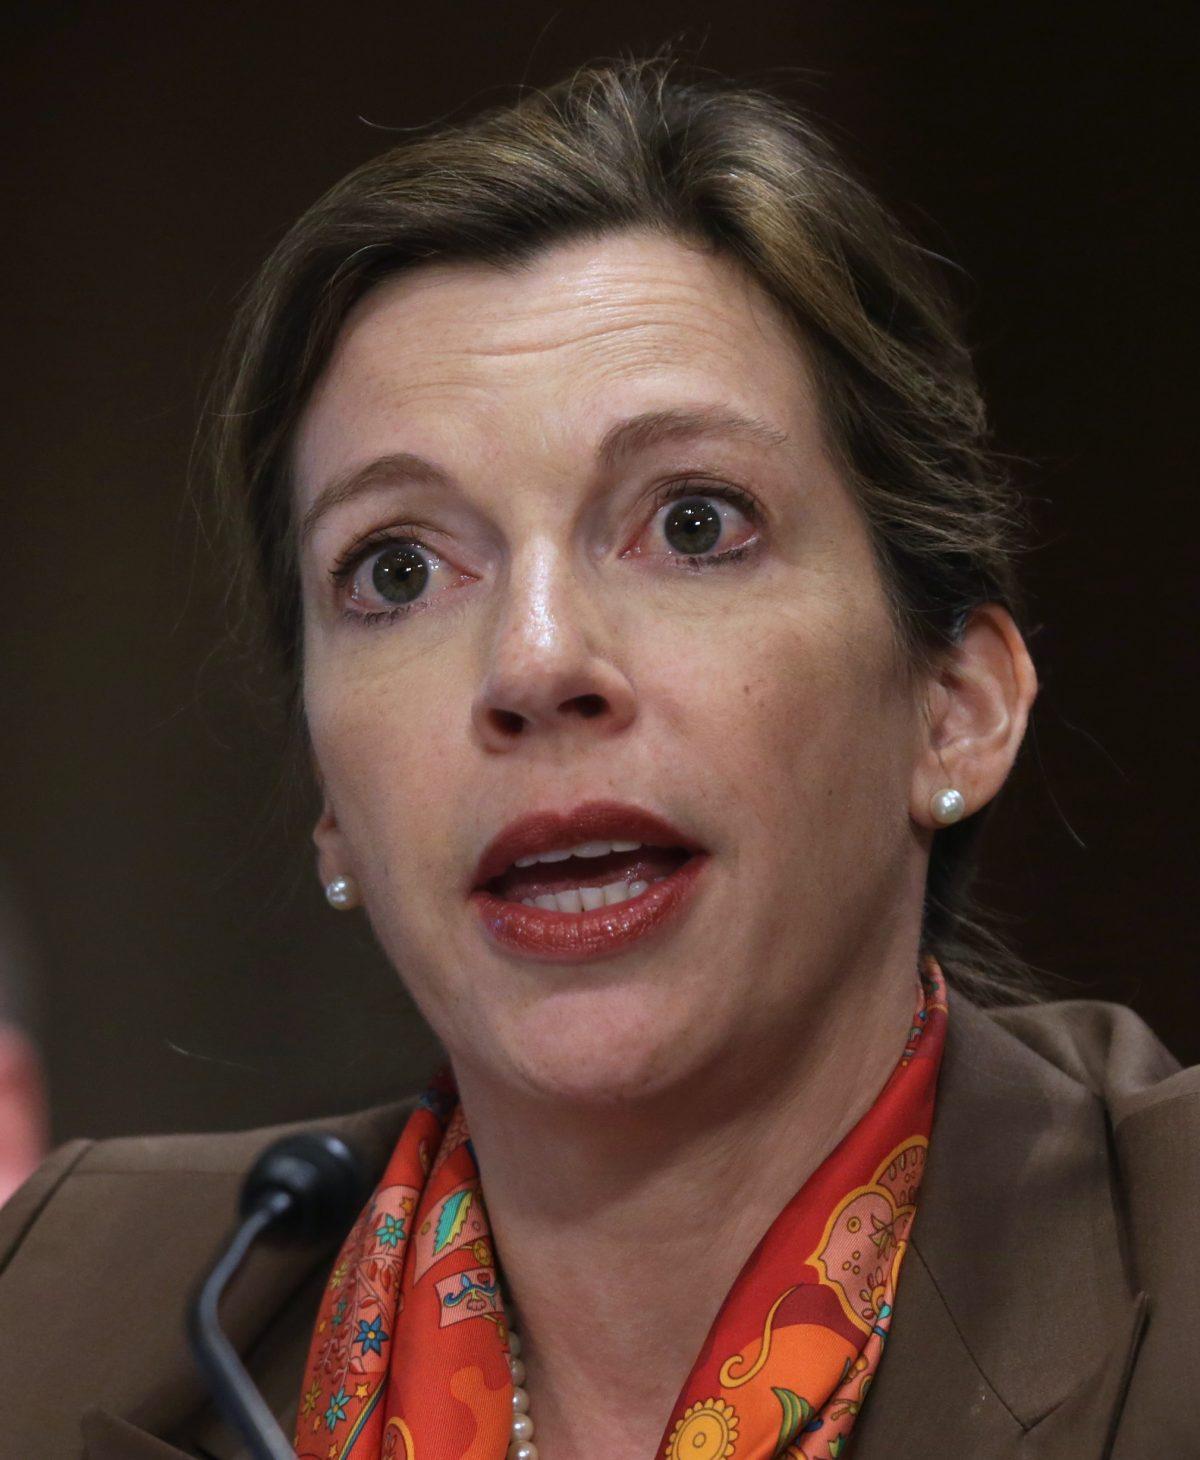 Deputy Assistant Secretary of Defense for Russia/Ukraine/Eurasia Evelyn Farkas on May 6, 2014. (Alex Wong/Getty Images)